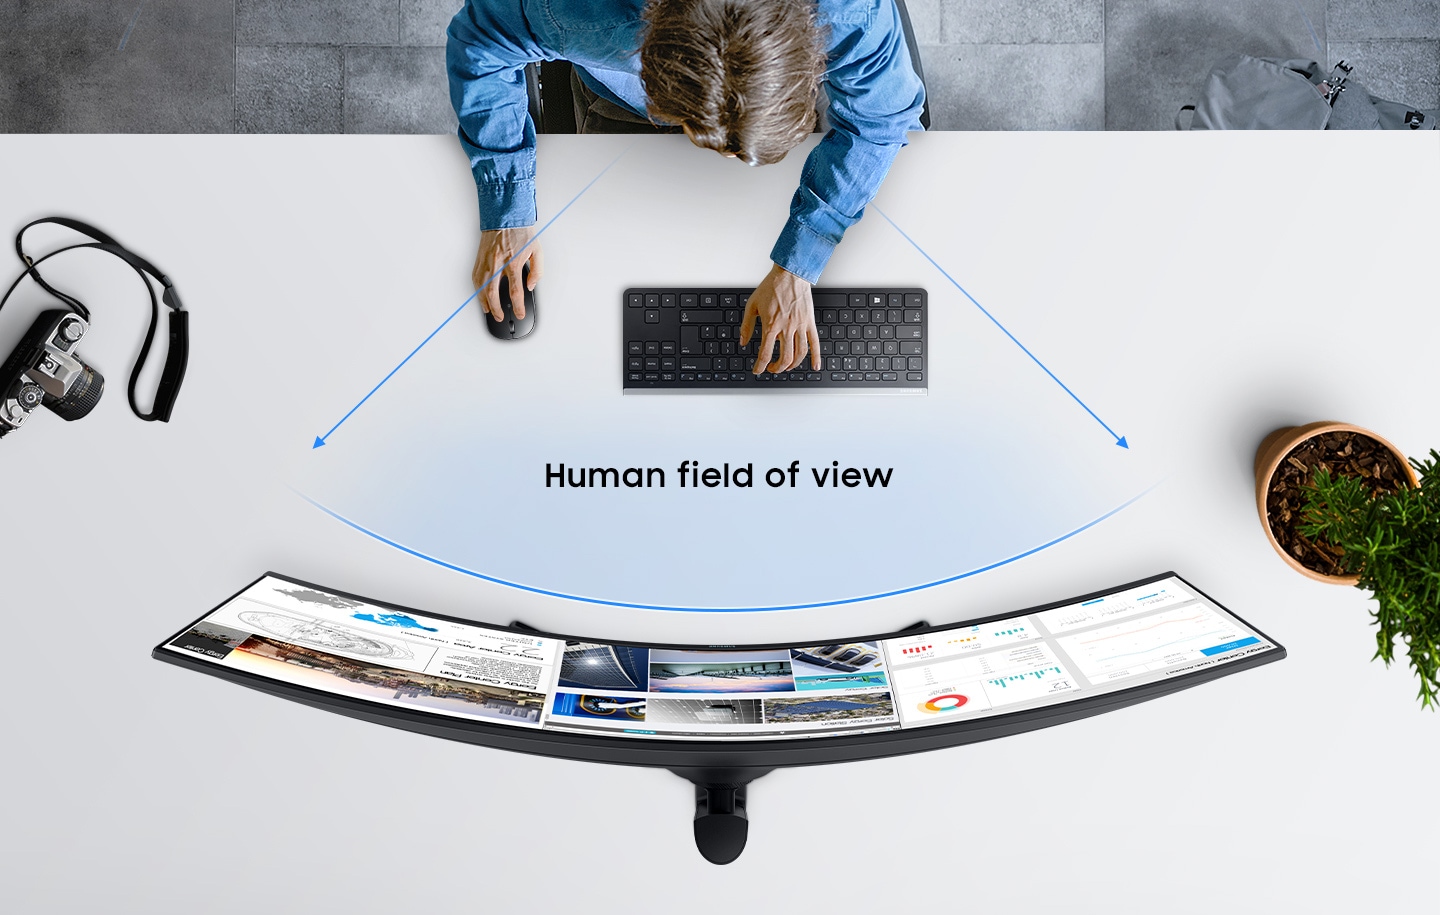 Birdseye view of S9 with an individual sitting in front of the monitor using a keyboard and mouse. Two gray beams of light are overlaid with the words 'Eye Fatigue Zone' while a blue curve shows the human field of view to demonstrate how the curved monitor matches the human eyesight. Also, on the desk either side of the individual using the monitor is a black digital camera and potted green plant.